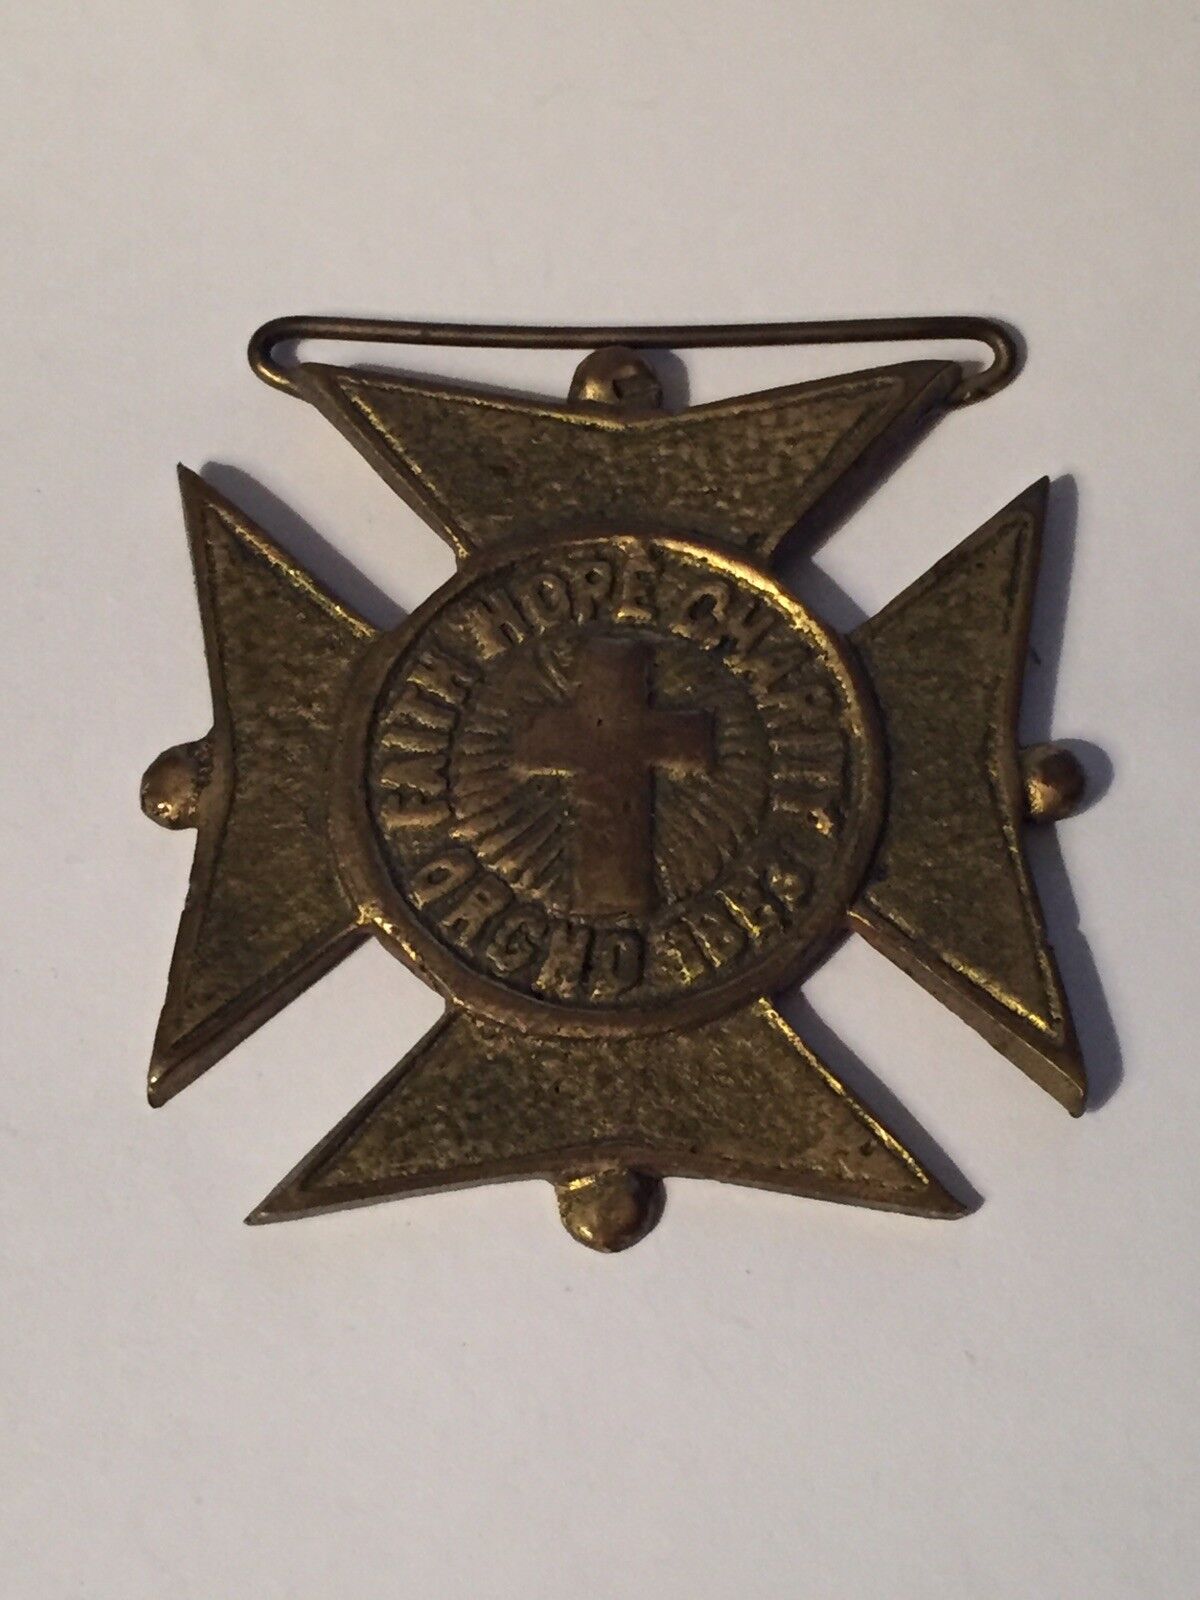 FAITH HOPE AND CHARITY DRGND 1883 CATHOLIC ORDER OF FORESTERS BRASS MEDAL 